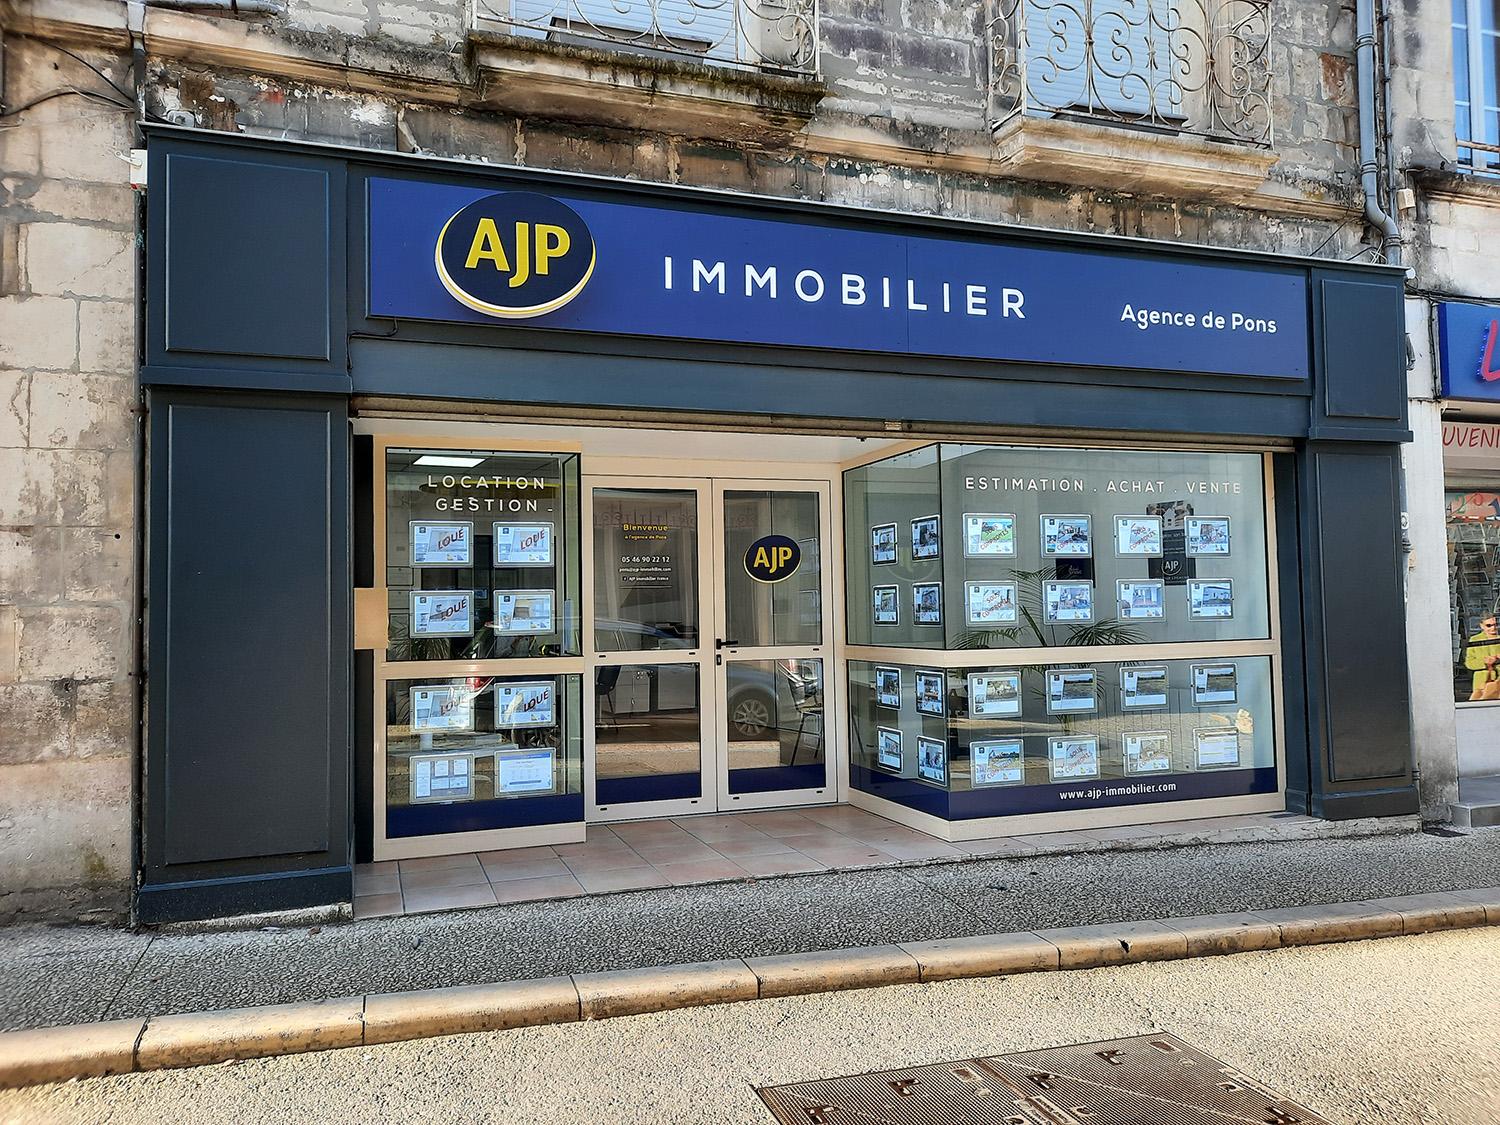 AJP Immobilier Pons